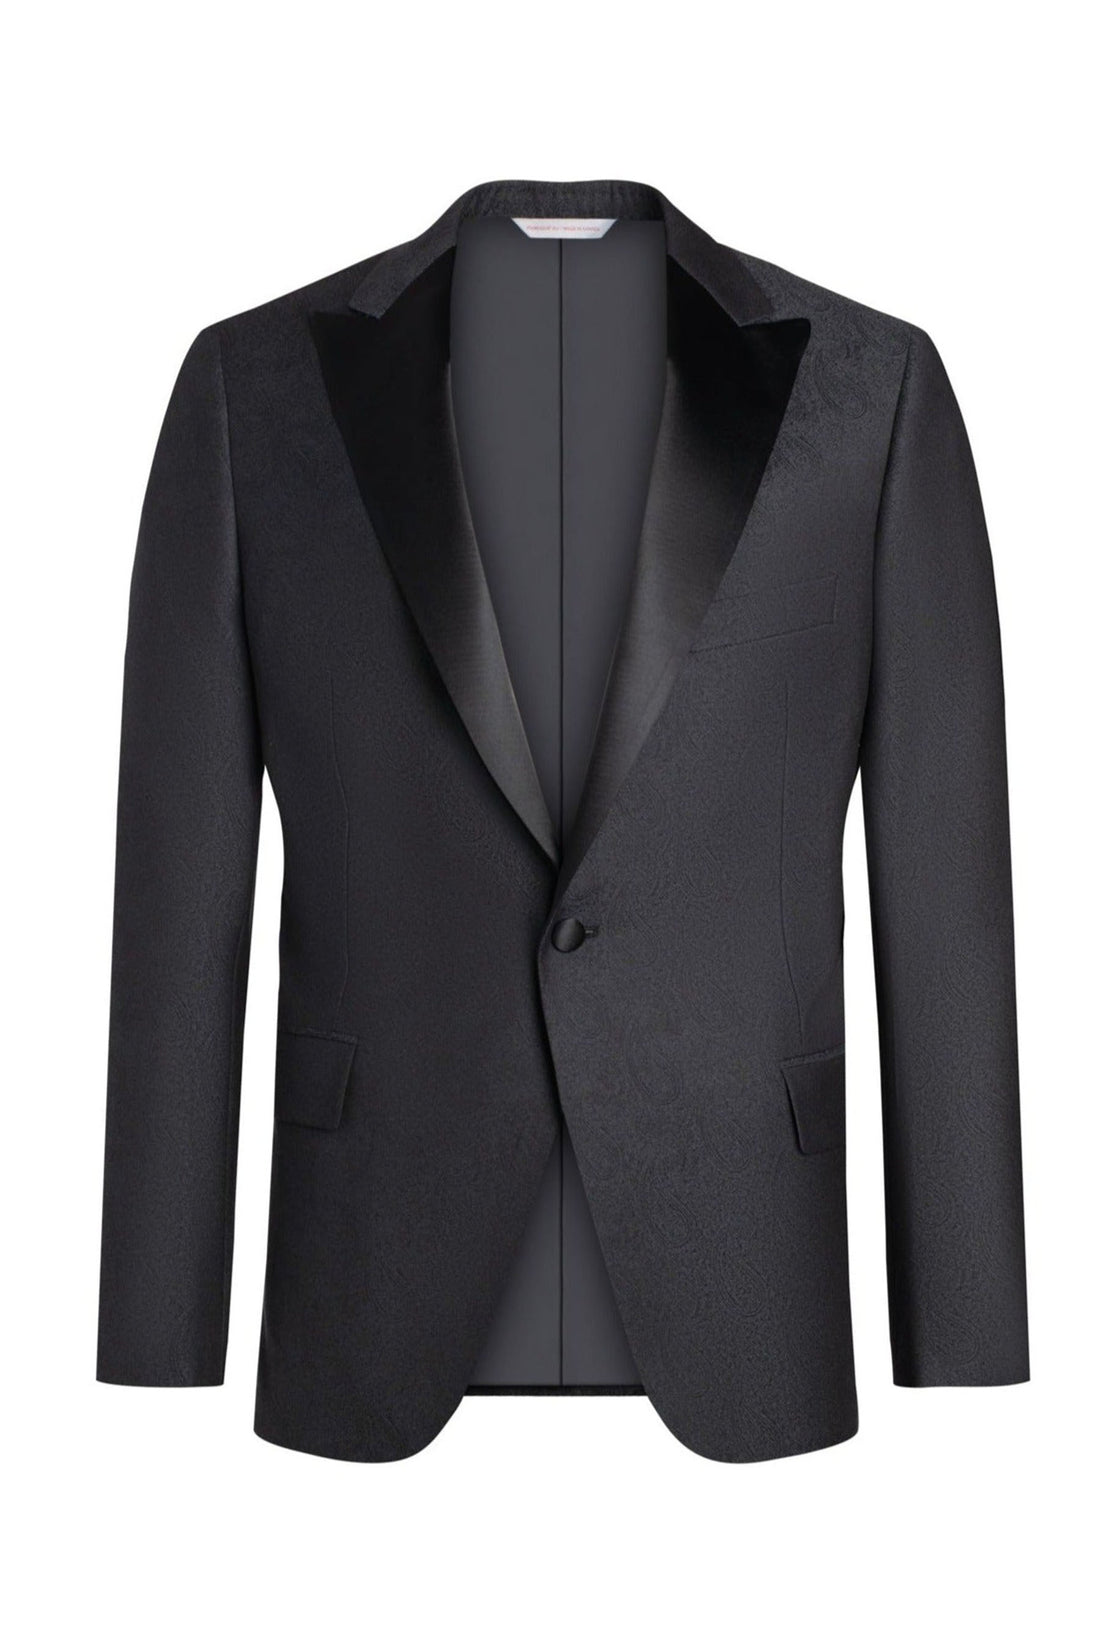 Charcoal Paisley Dinner Jacket